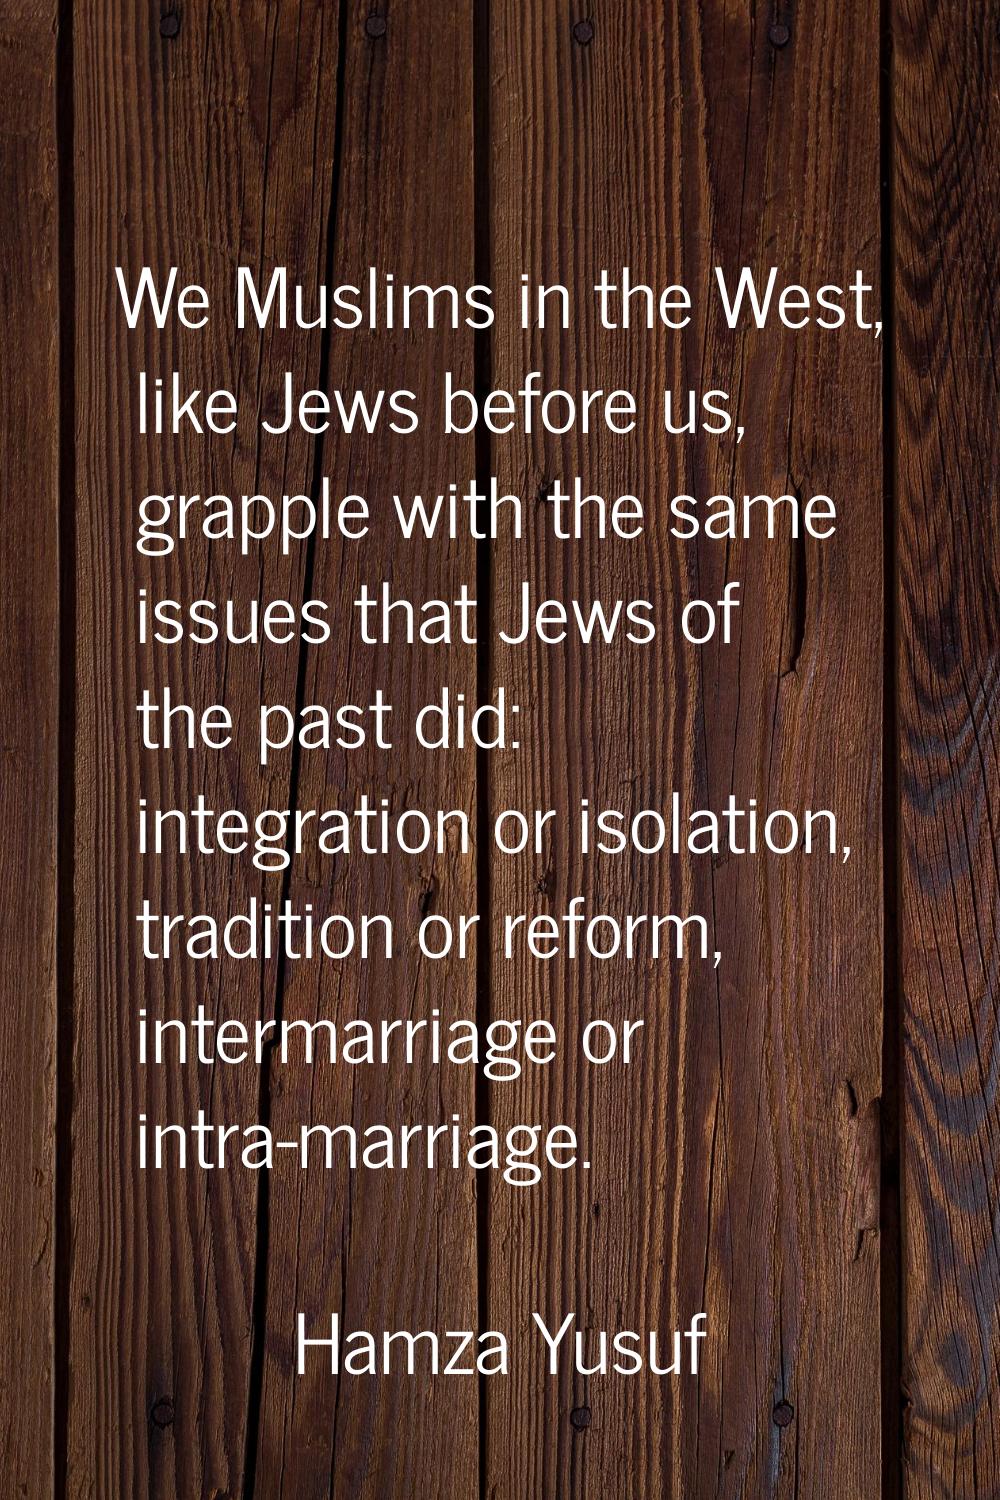 We Muslims in the West, like Jews before us, grapple with the same issues that Jews of the past did